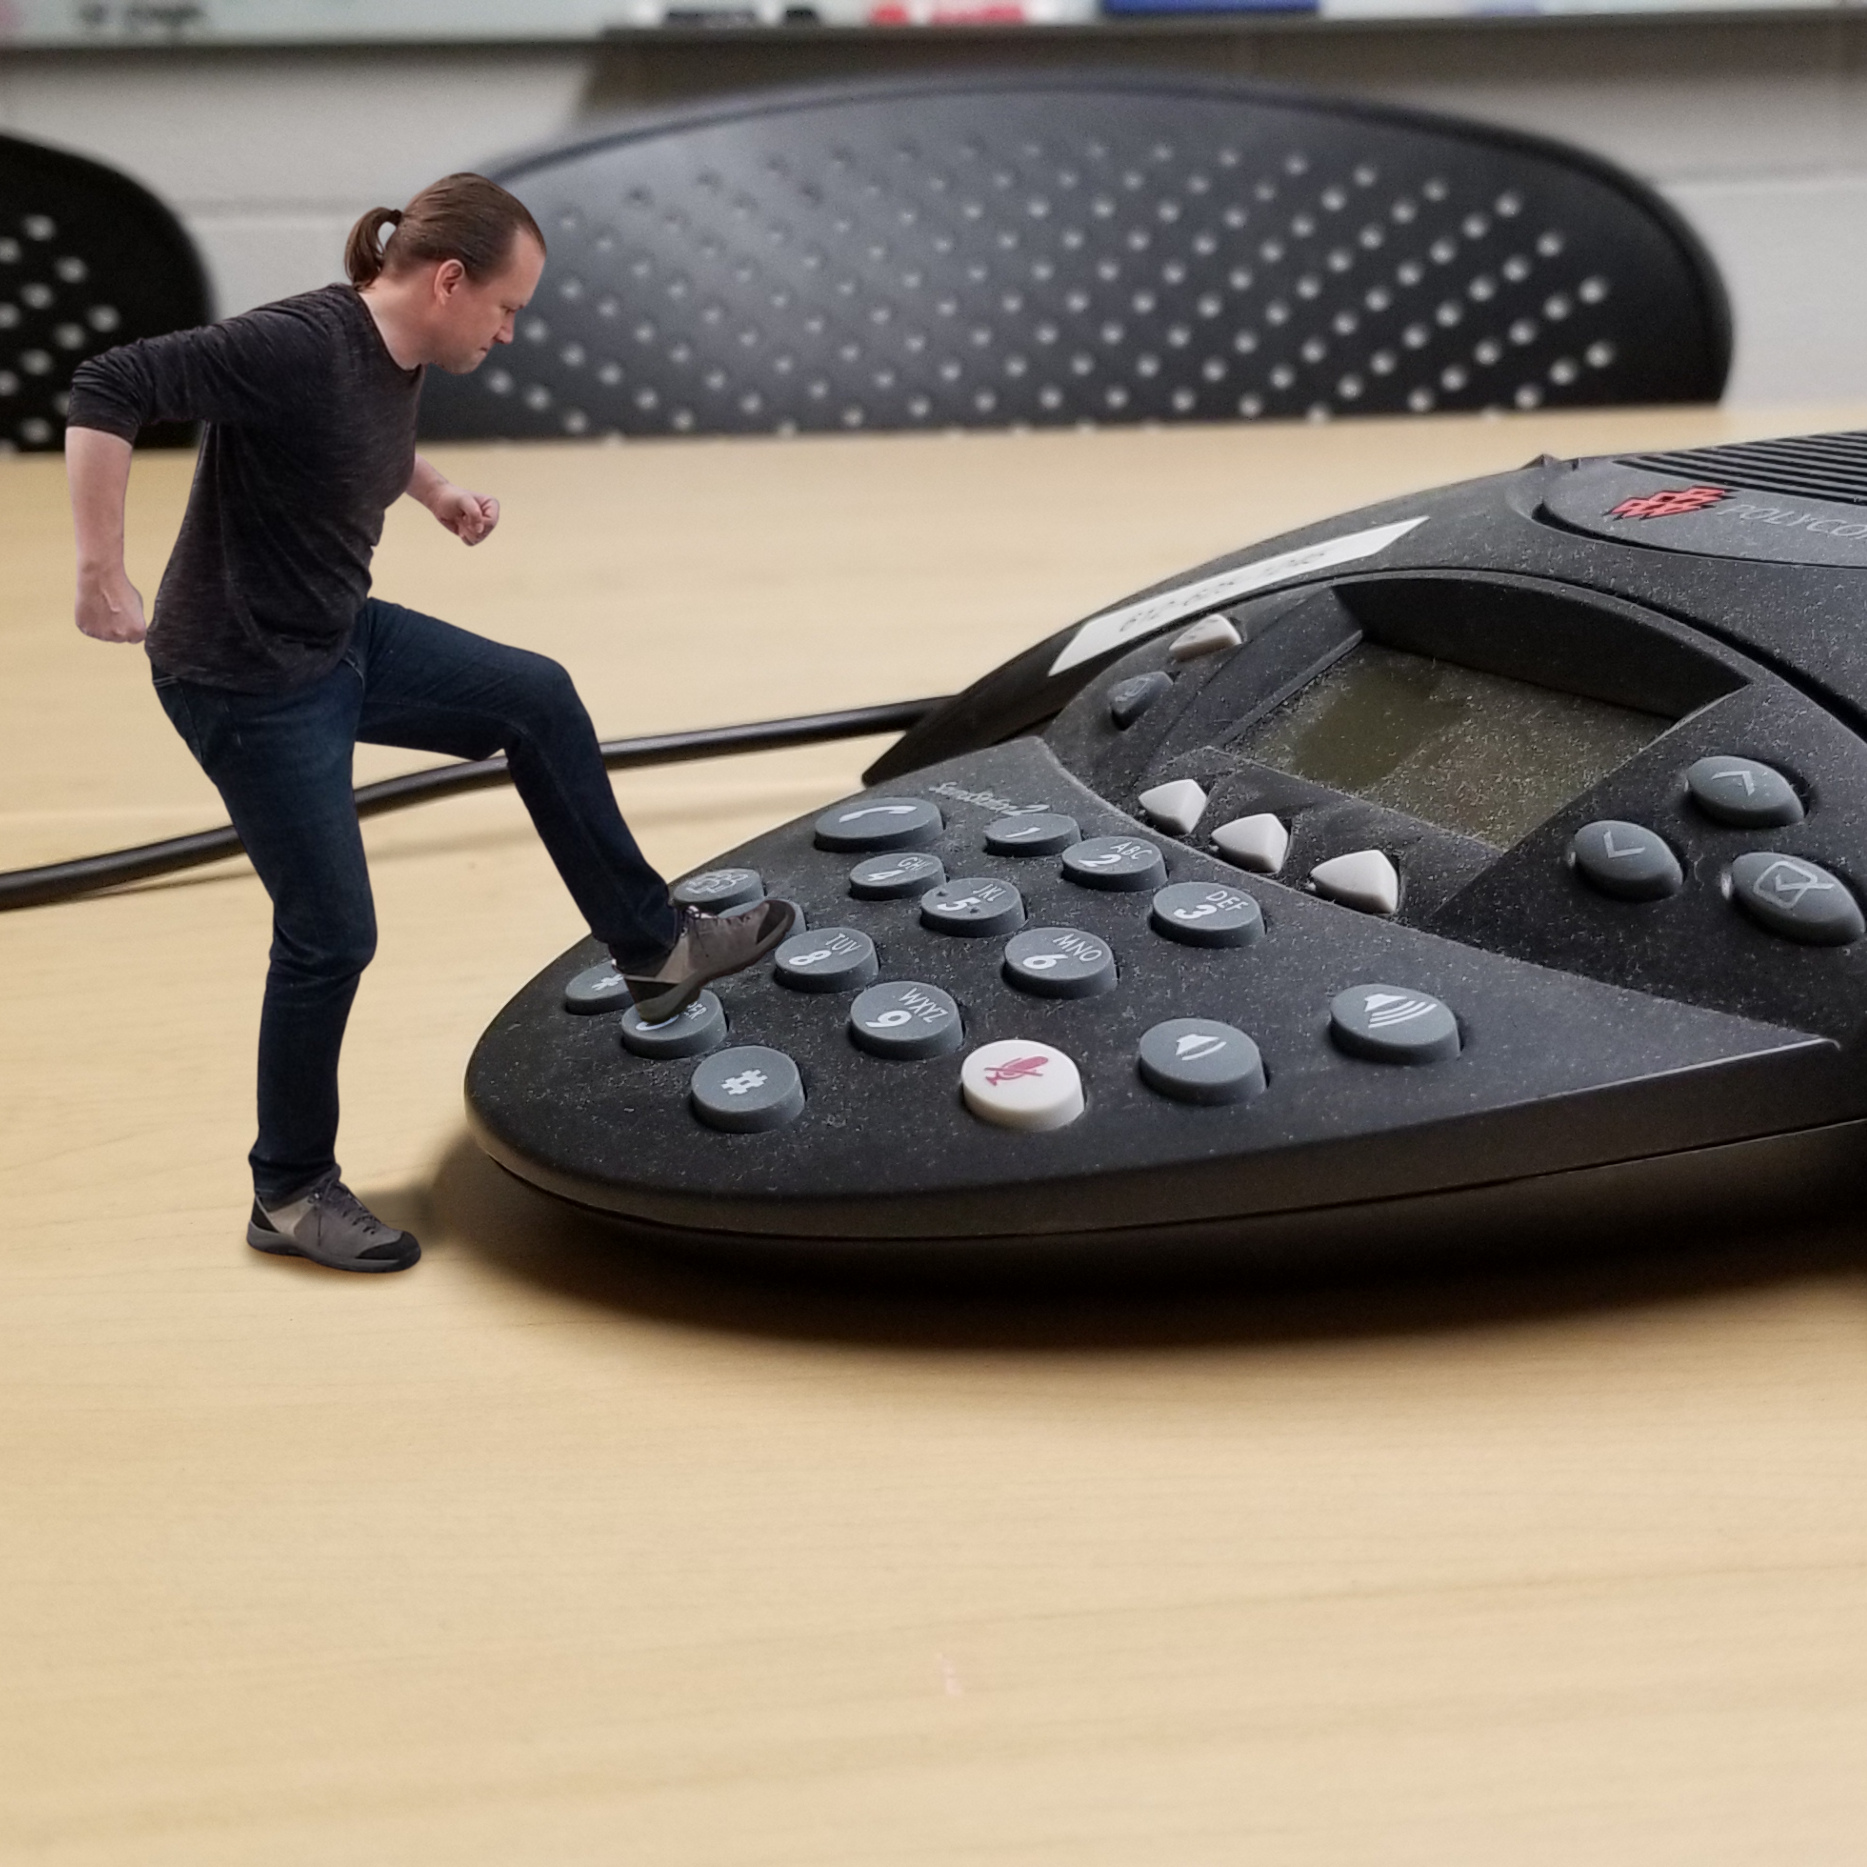 A tiny man in dark clothes stomps on the keypad of an office conference phone.